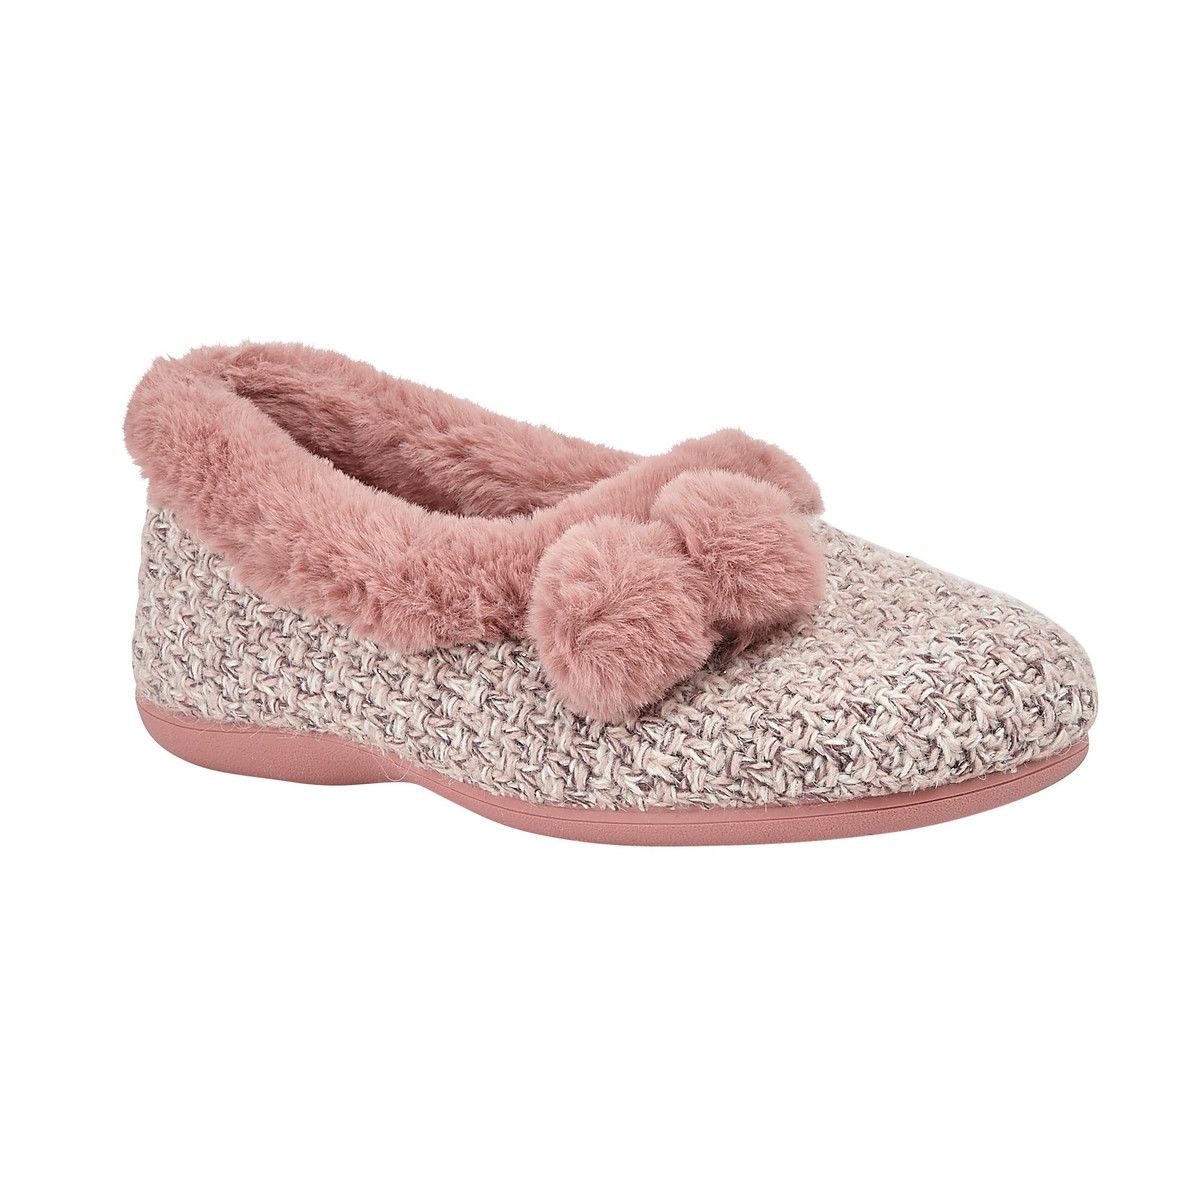 Lotus Alice Pink Womens slipper mules in a Plain Textile in Size 7